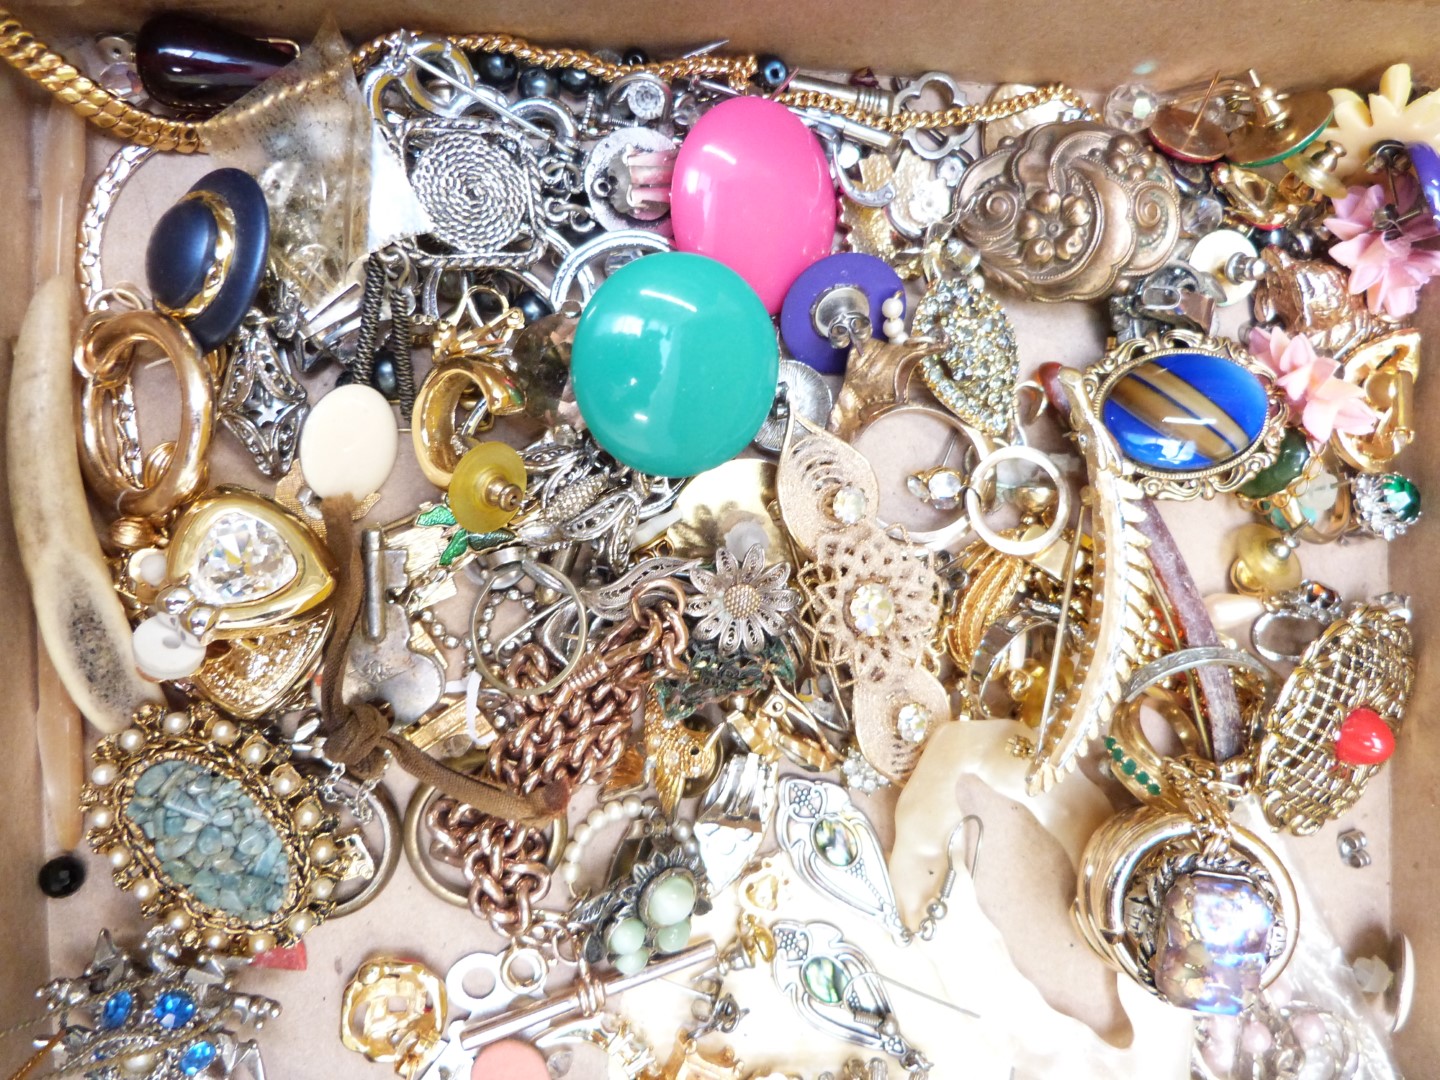 A large collection of costume jewellery including agate beads, vintage brooches, vintage earrings, - Image 9 of 10